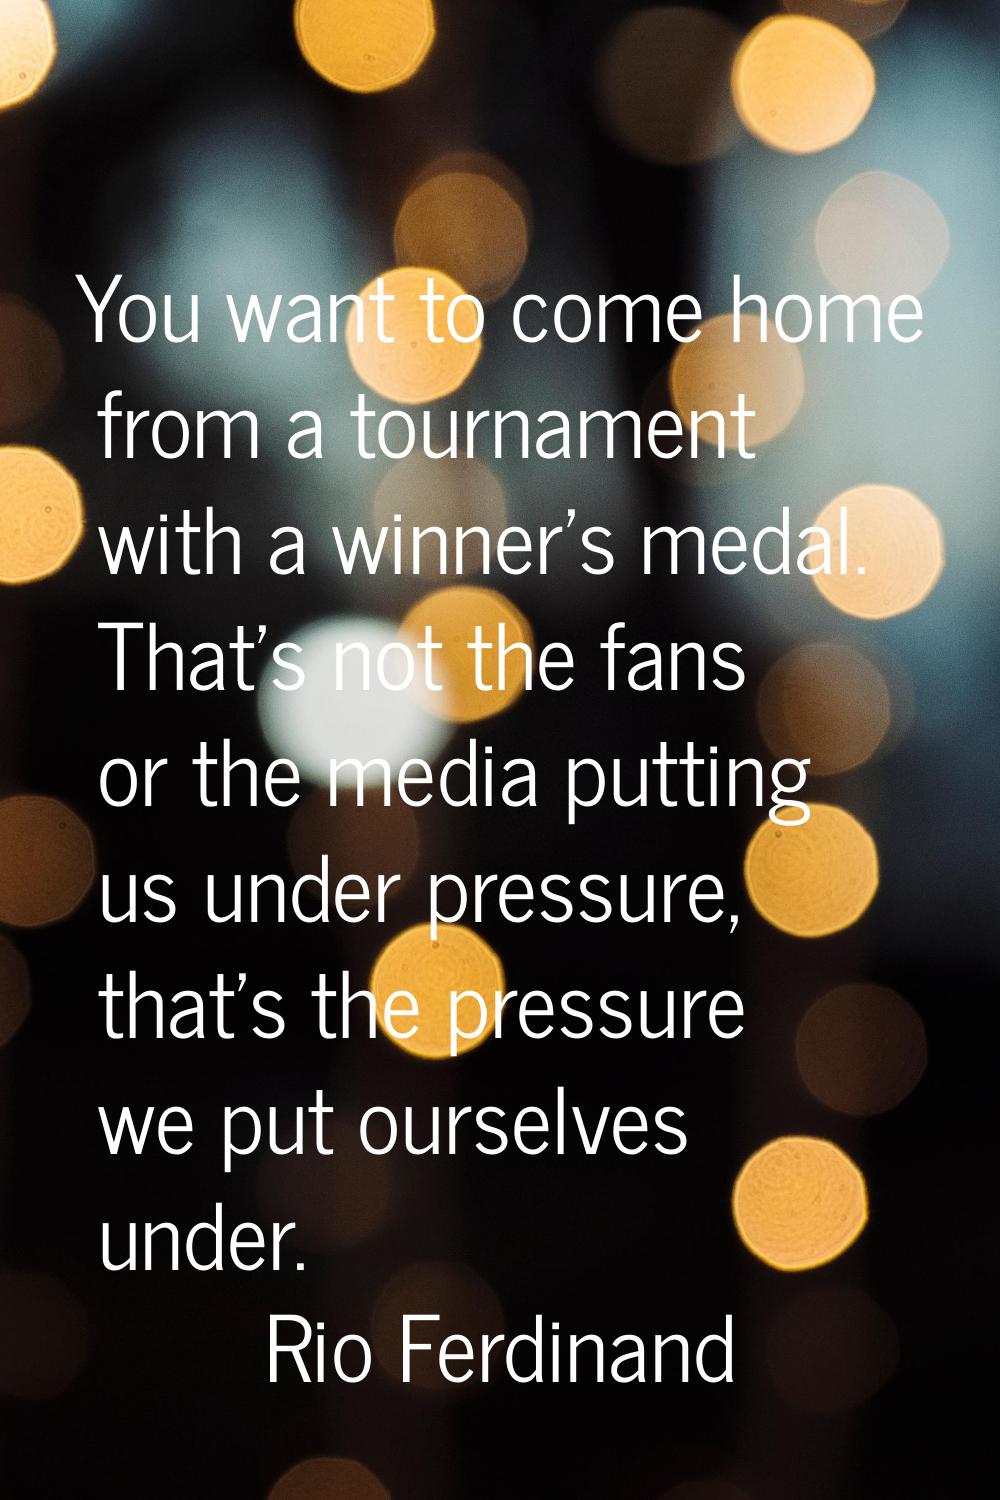 You want to come home from a tournament with a winner's medal. That's not the fans or the media put